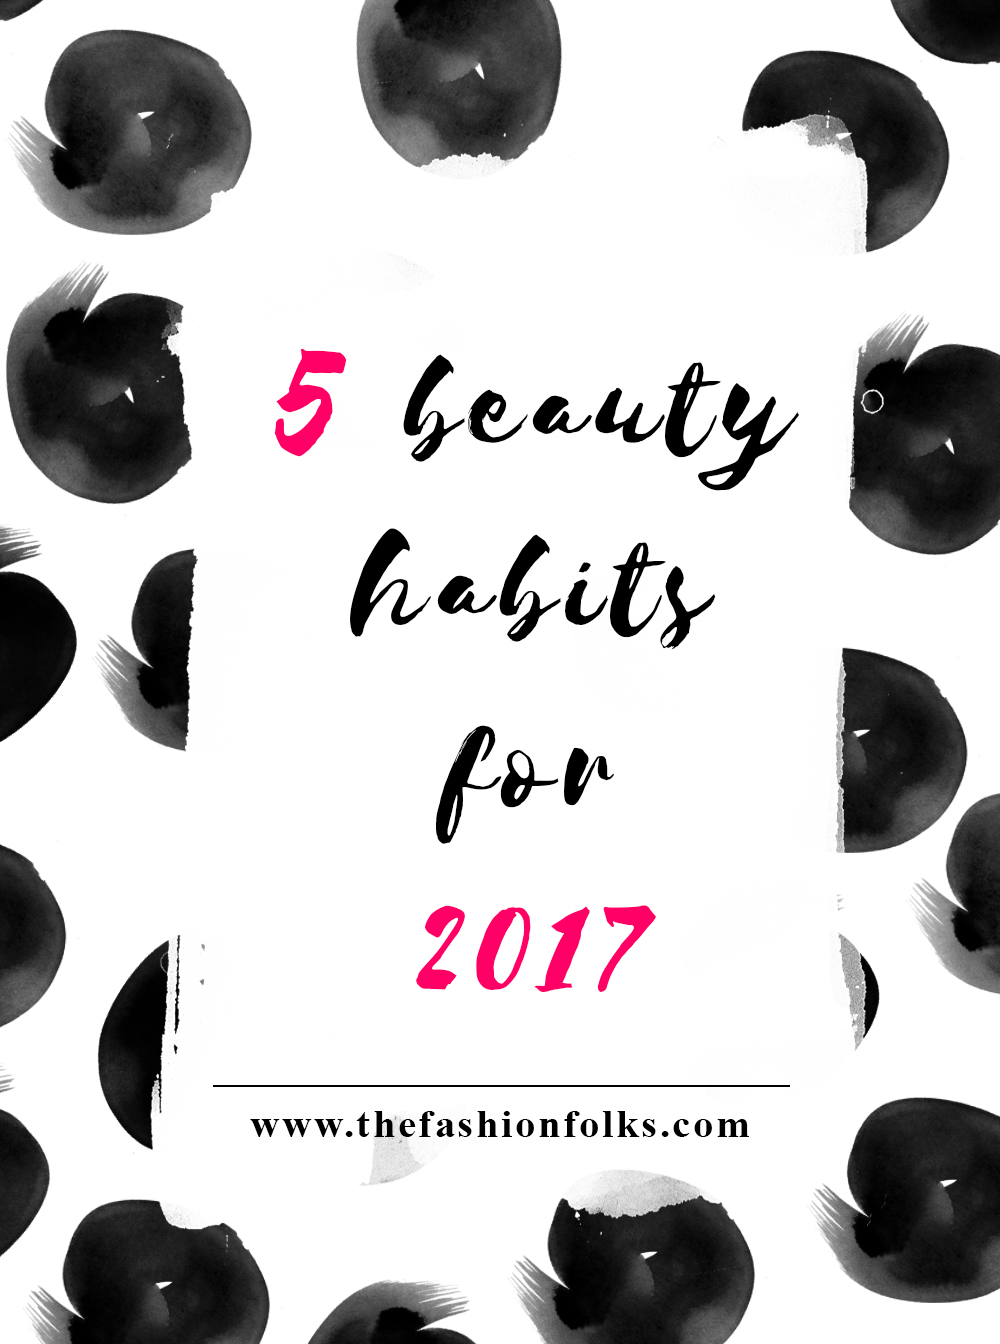 5 Beauty Habits For 2017 + Skincare Routine, makeup inspiration, ideas for hairdos | The Fashion Folks